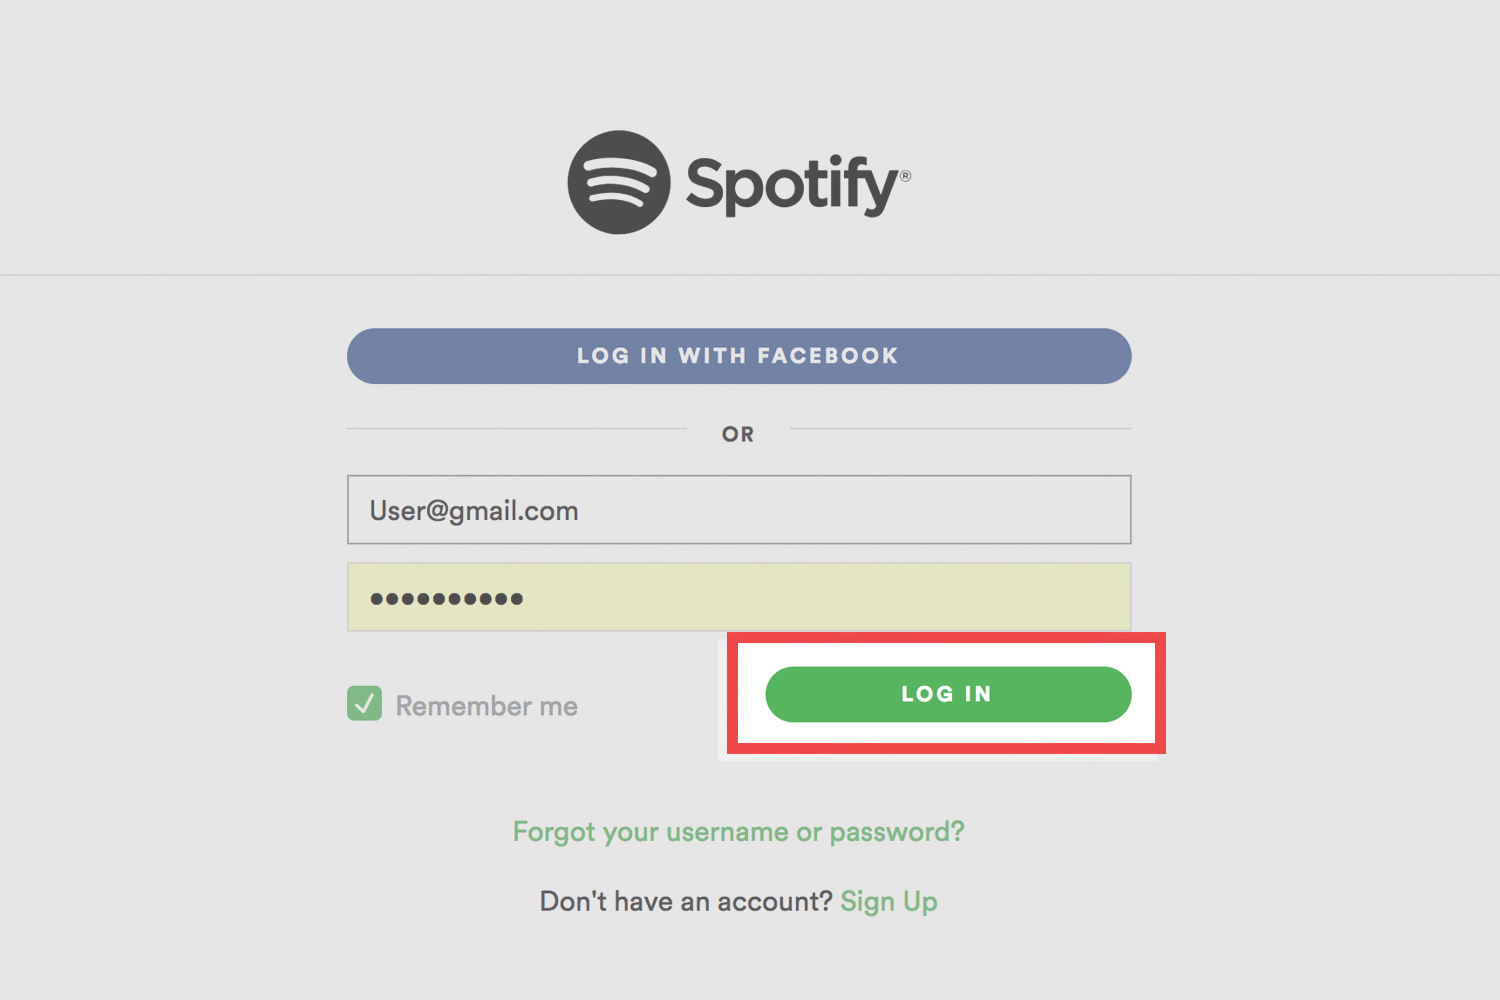 cant login to hulu with spotify